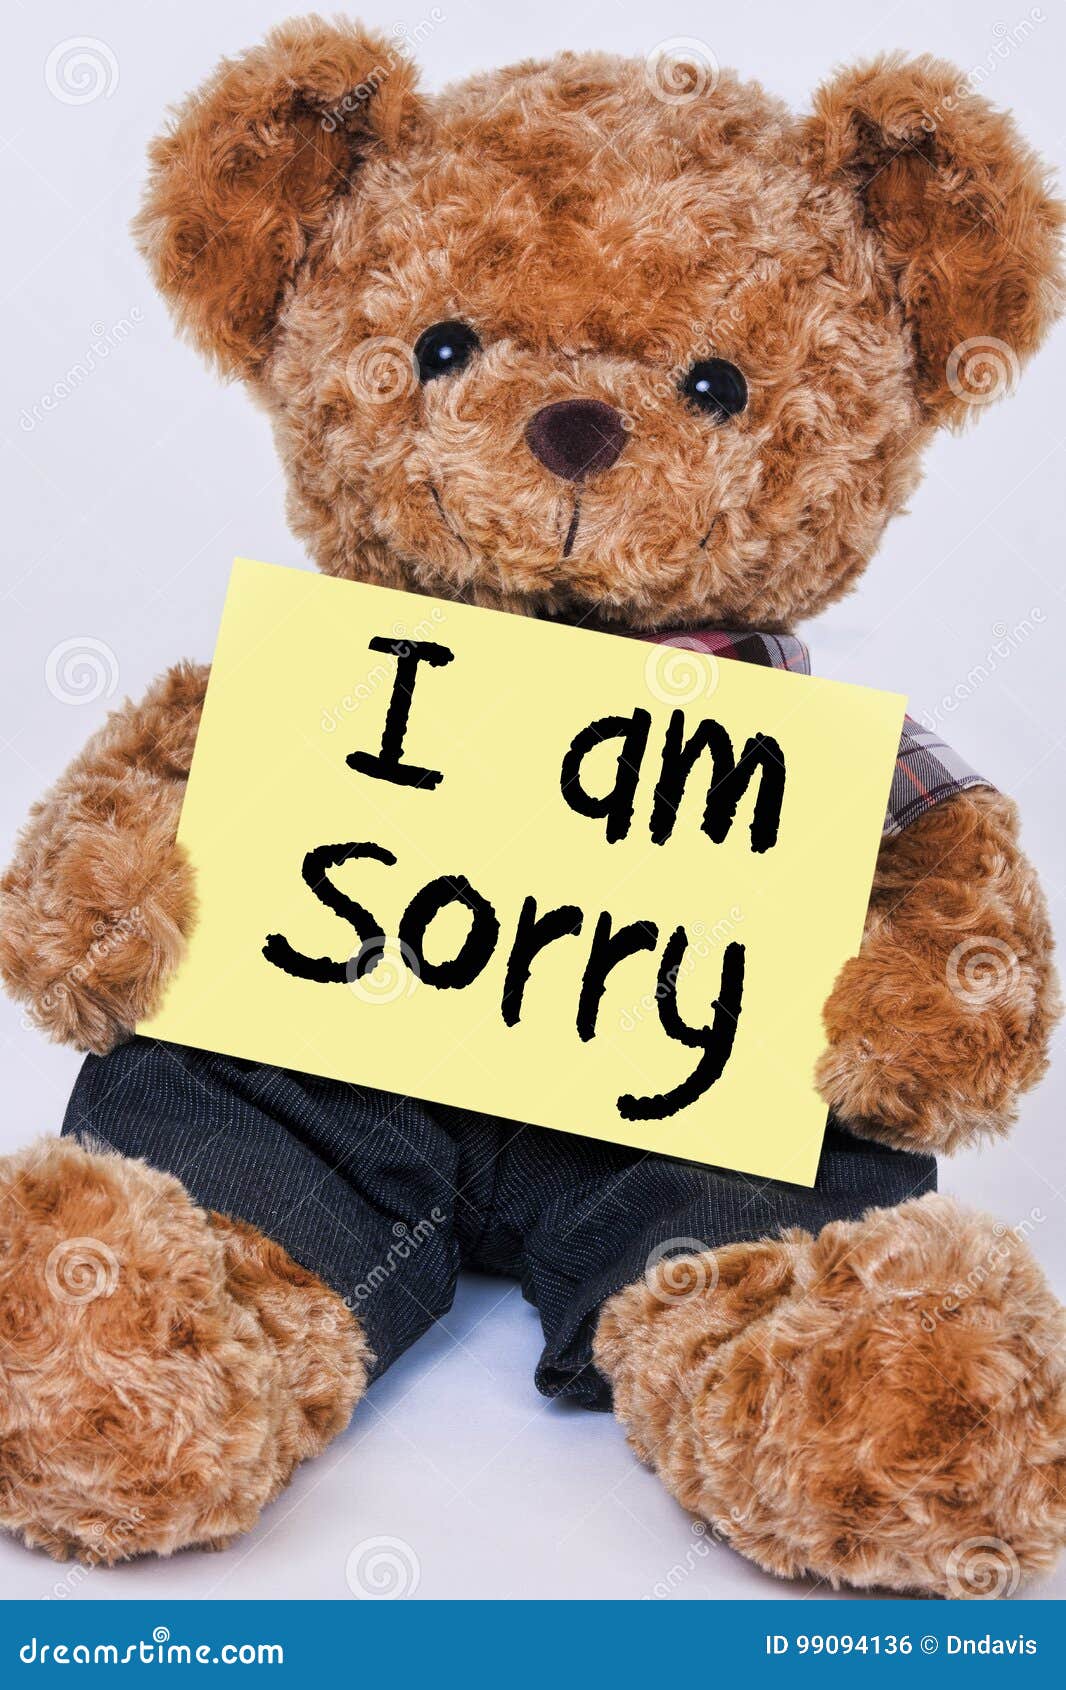 Teddy Bear Holding Yellow Sign that Says I am Sorry Stock Photo ...